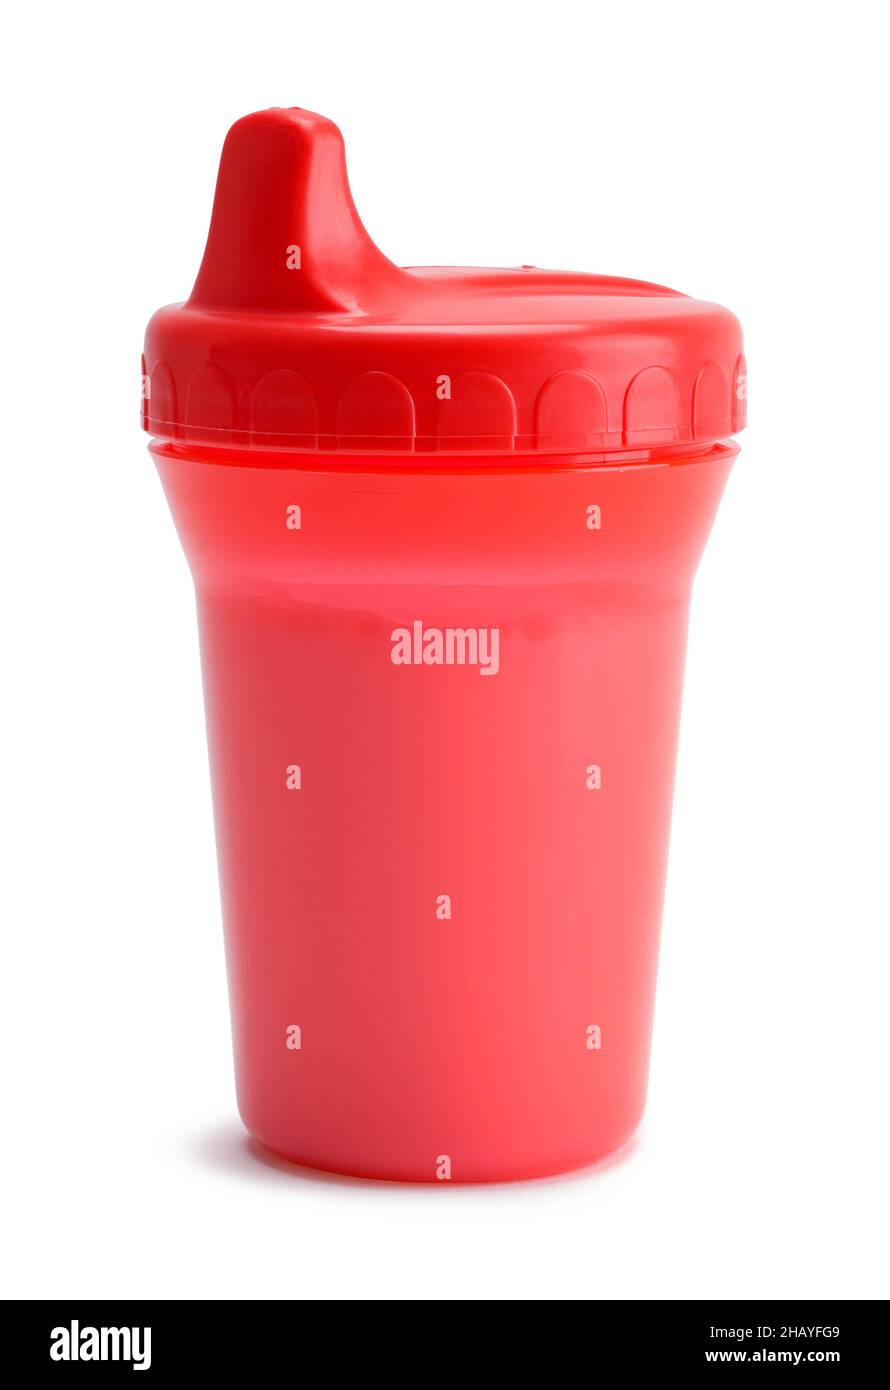 Red Baby Sip Cup Full Of Milk Cut Out on White. Stock Photo